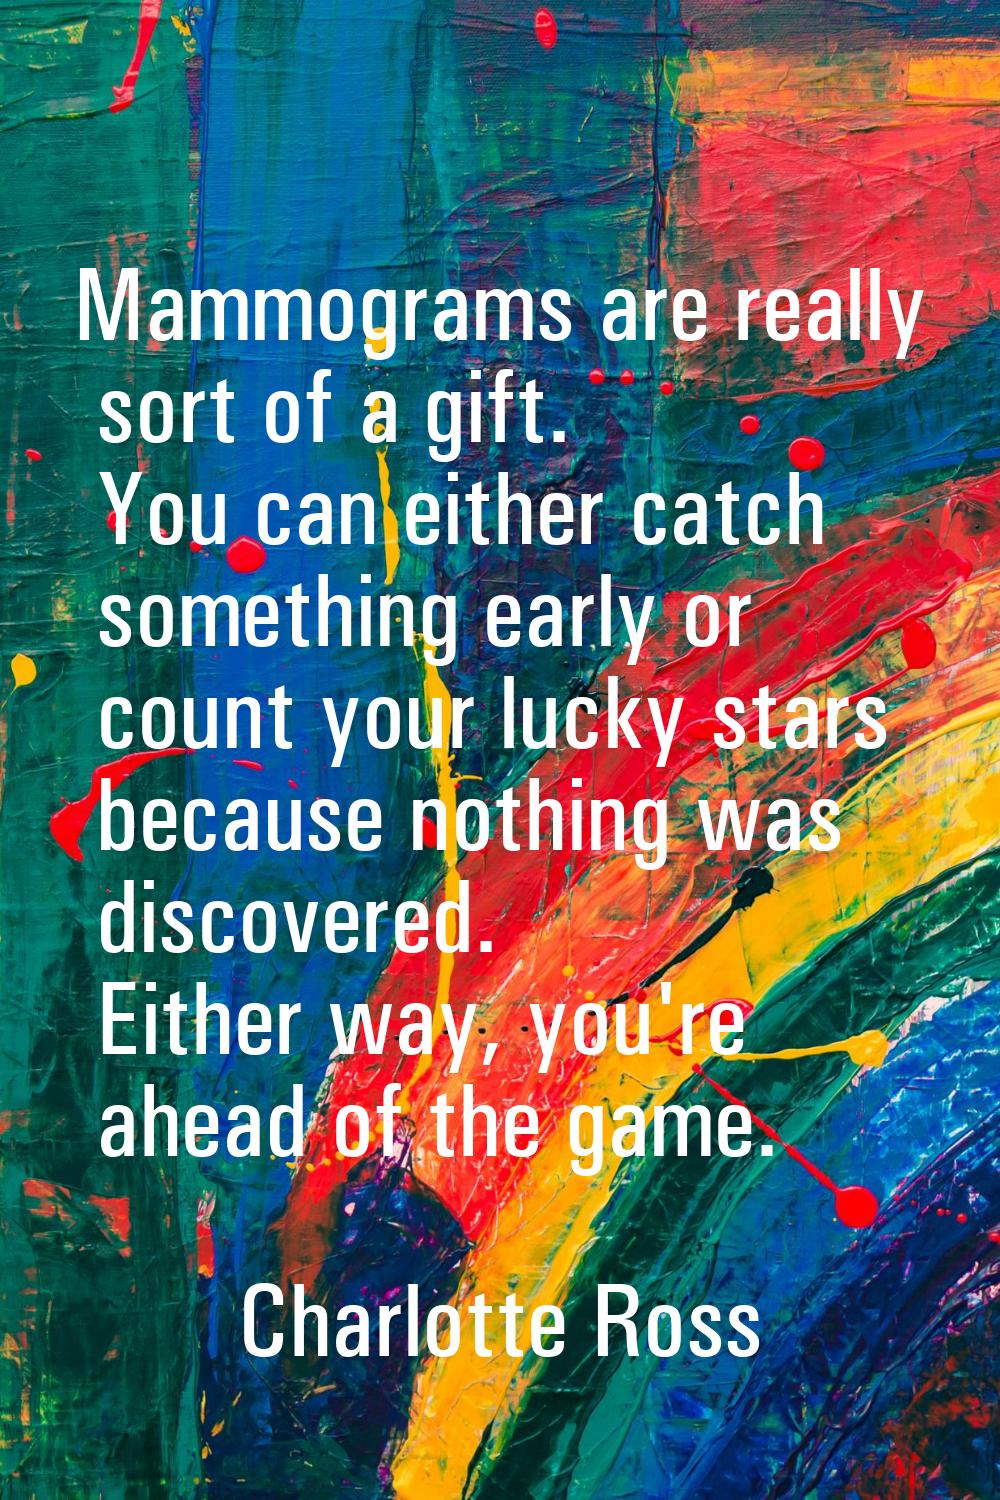 Mammograms are really sort of a gift. You can either catch something early or count your lucky star